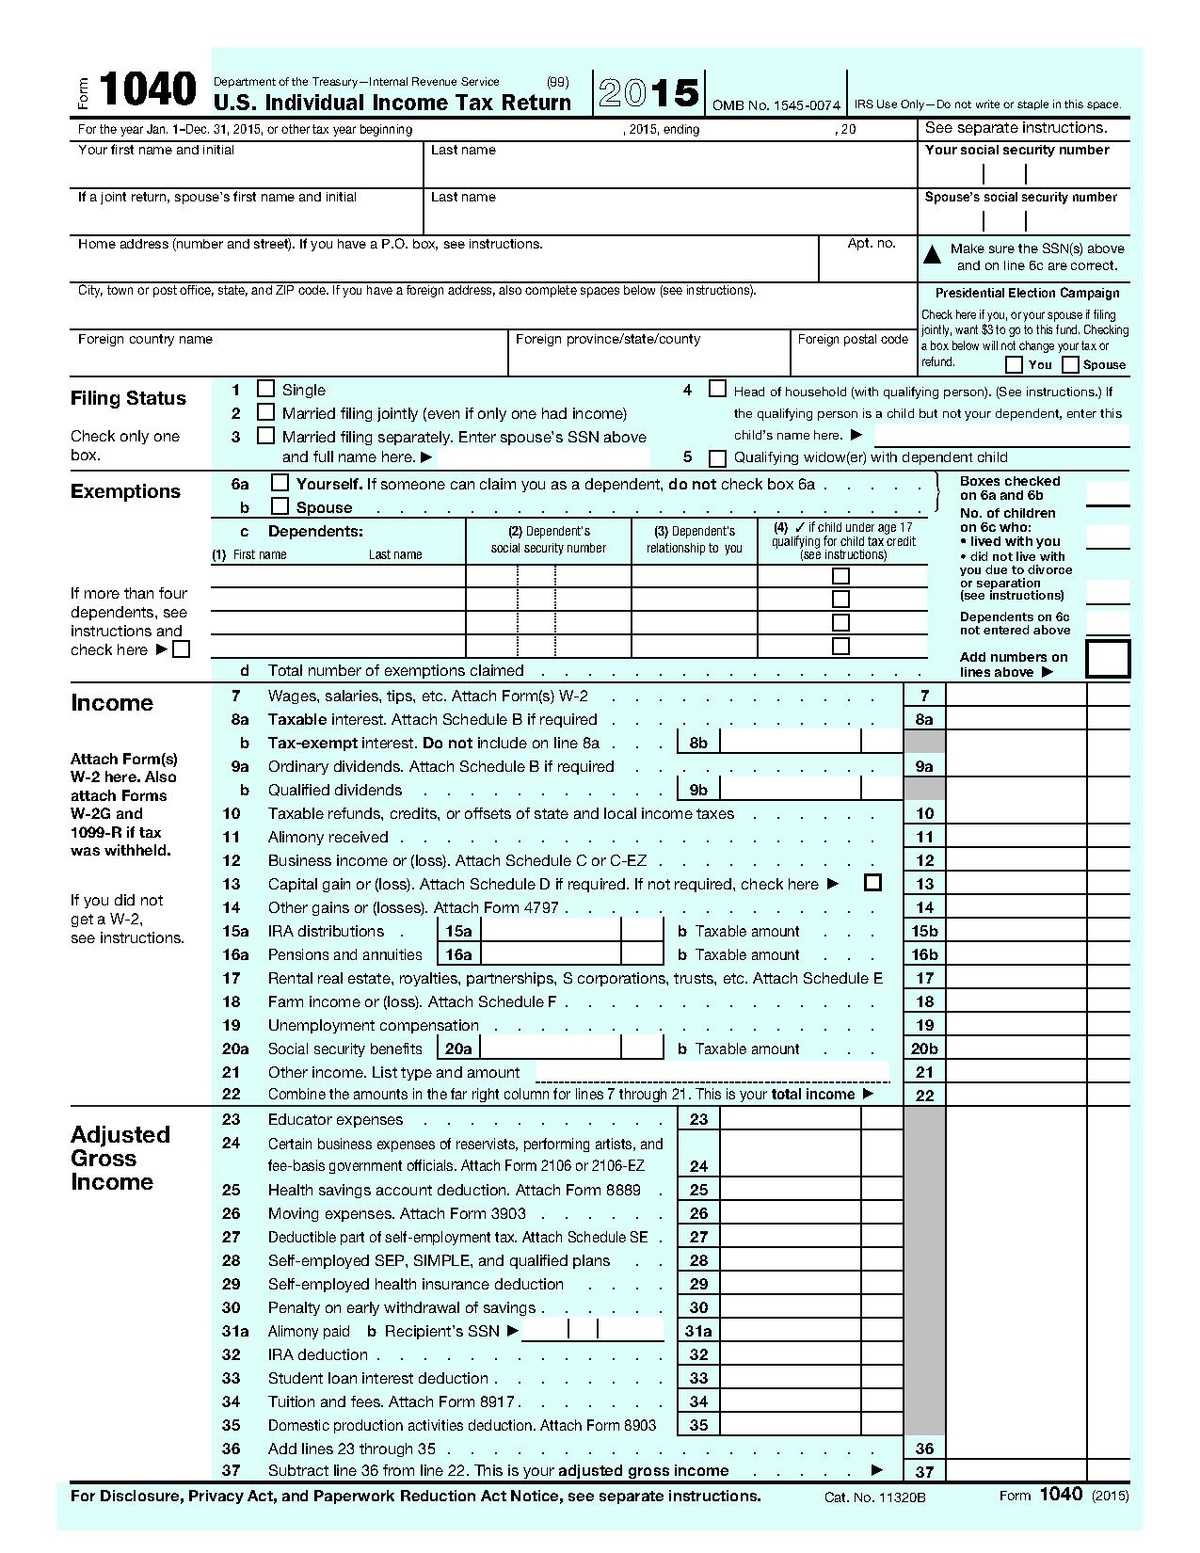 Ira Deduction Worksheet 2016 together with form 1040